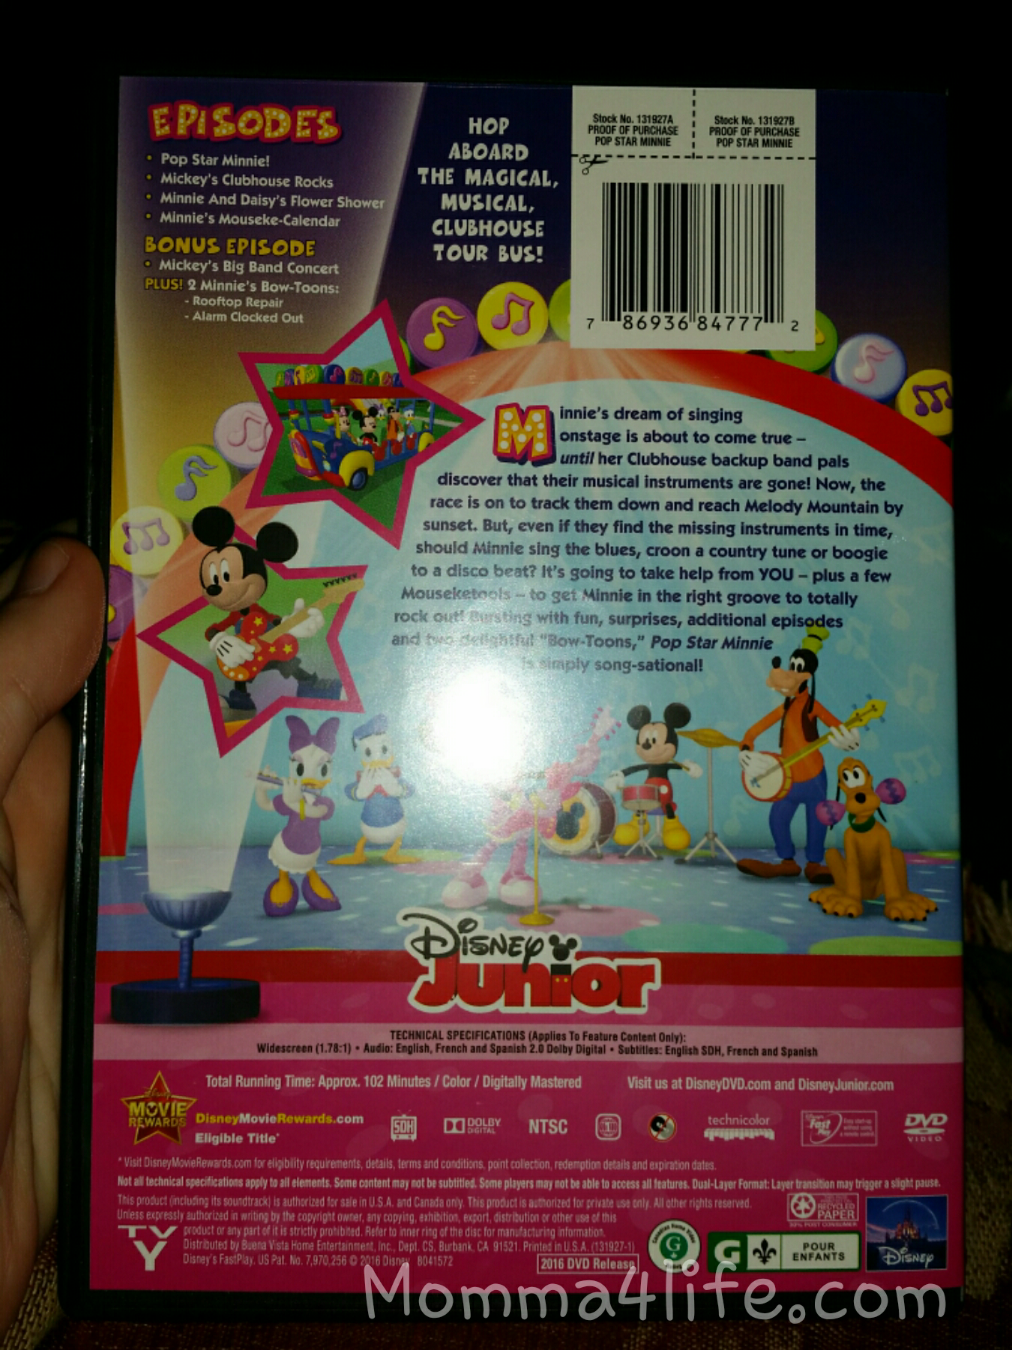 Momma4life Mickey Mouse Clubhouse Pop Star Minnie On Dvd 22